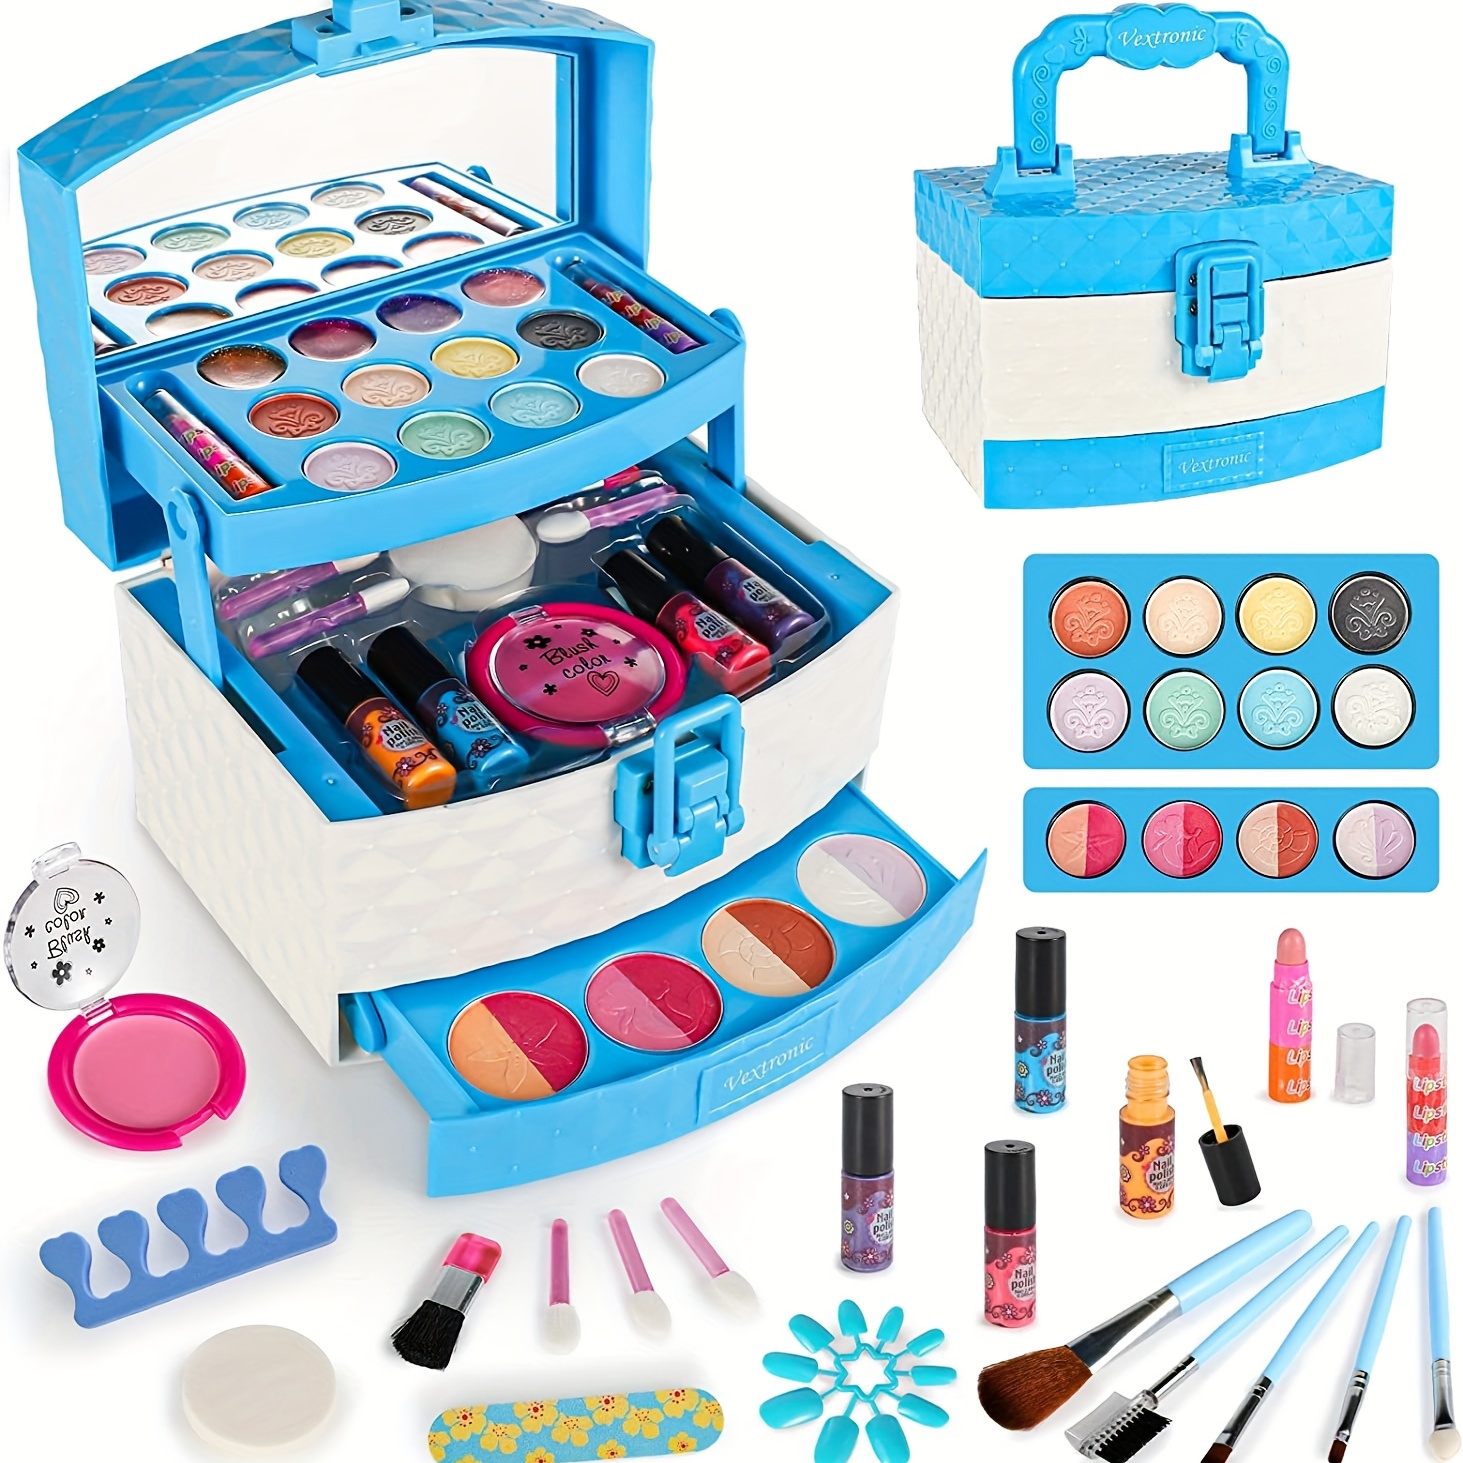  Vextronic Kids Makeup Sets for Girls, Washable Toddler Makeup  Kit, Non Toxic & Safe Pretend Play Makeup for Kids Ages 3 4 5 6 7 8 9 10 11  12, Little